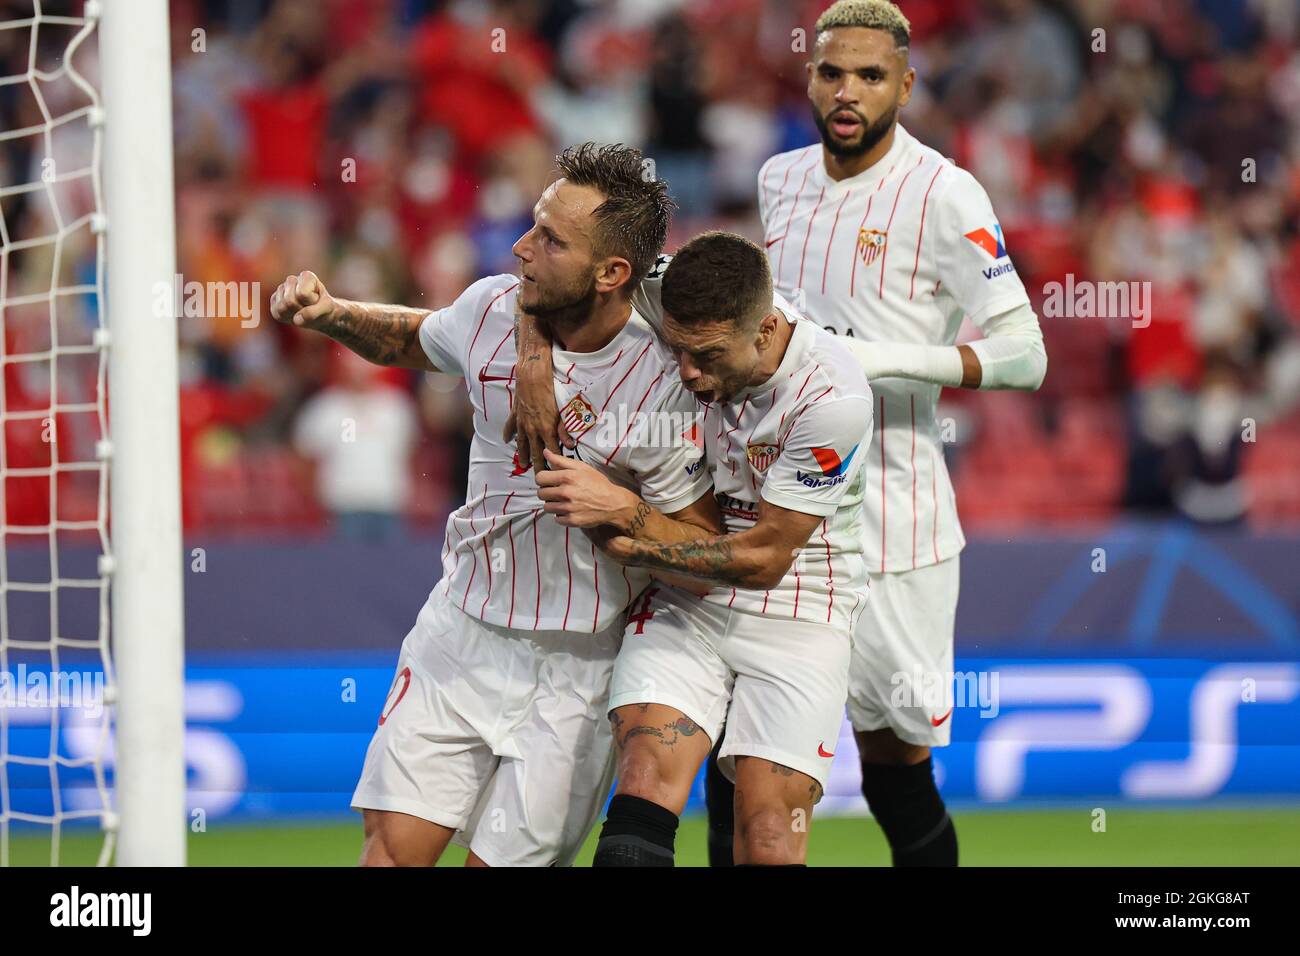 Seville, Seville, Spain. 14th Sep, 2021. Ivan Rakitic of Sevilla CF  celebrates a goal with Papu Gomez of Sevilla CF during the UEFA Champions  League Group G stage match between Sevilla FC